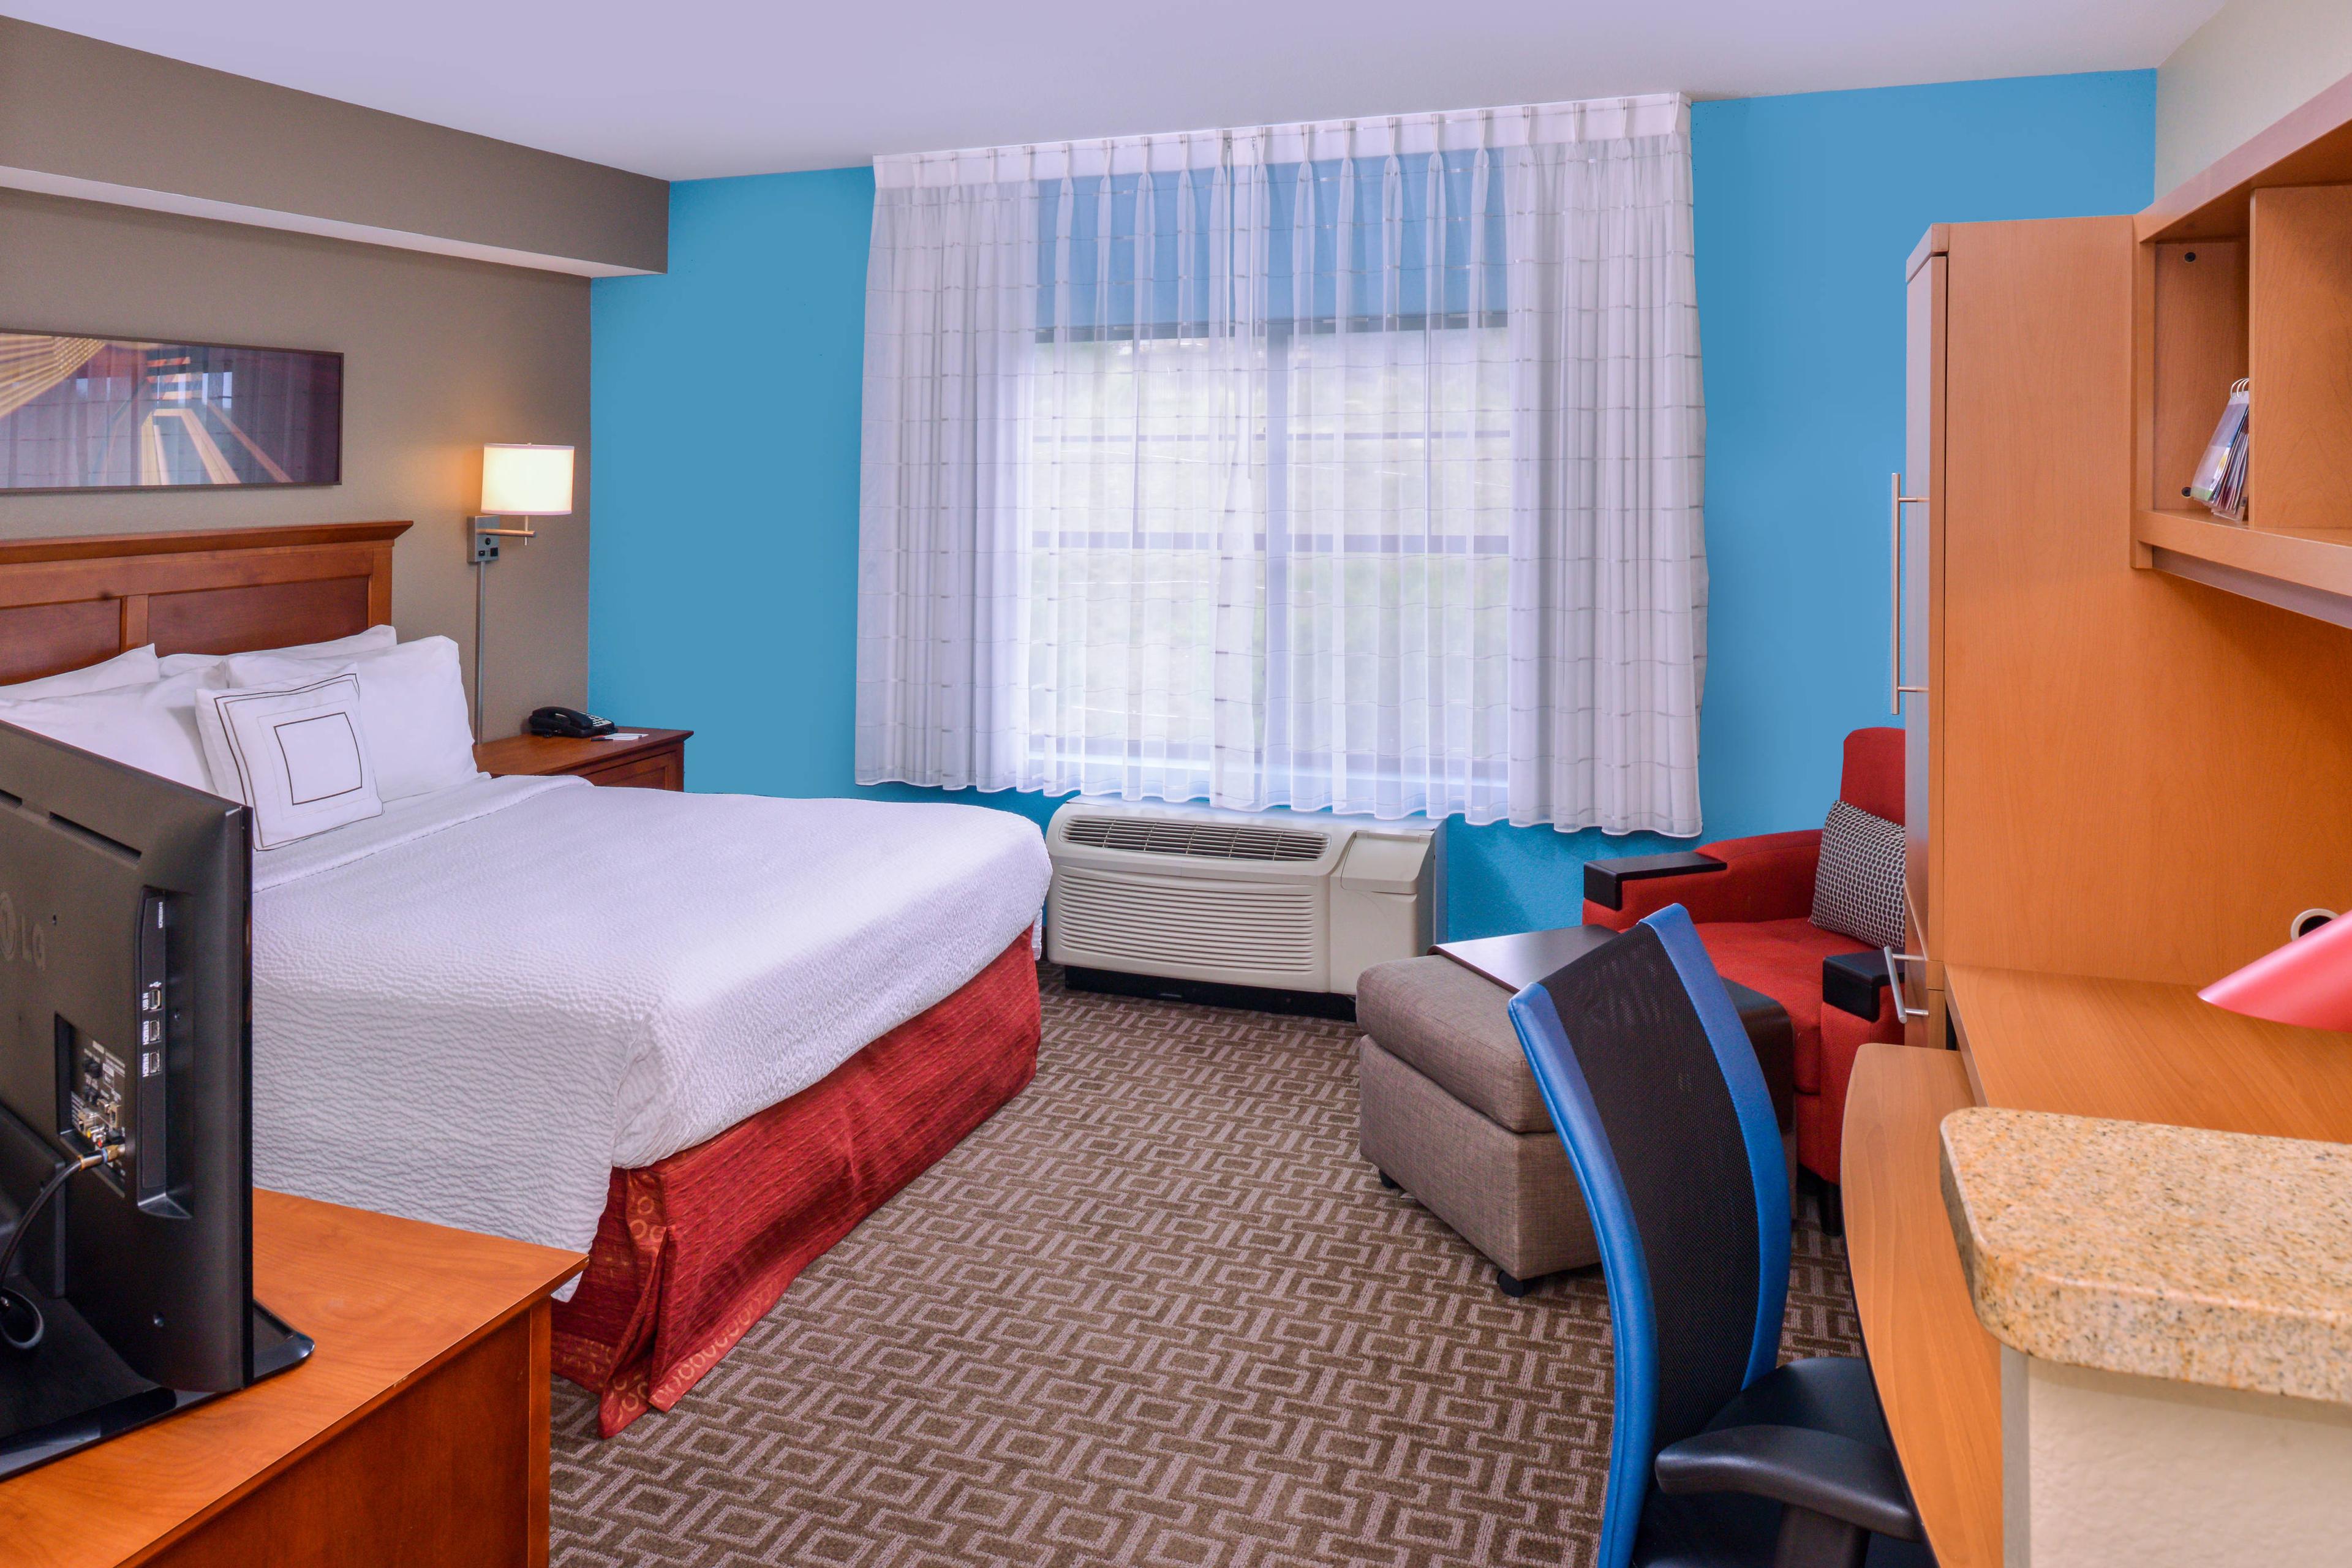 Tastefully decorated, our suites are as comfortable as they are clean. With all the amenities to make your stay enjoyable and convenient, they are the perfect home away from home.